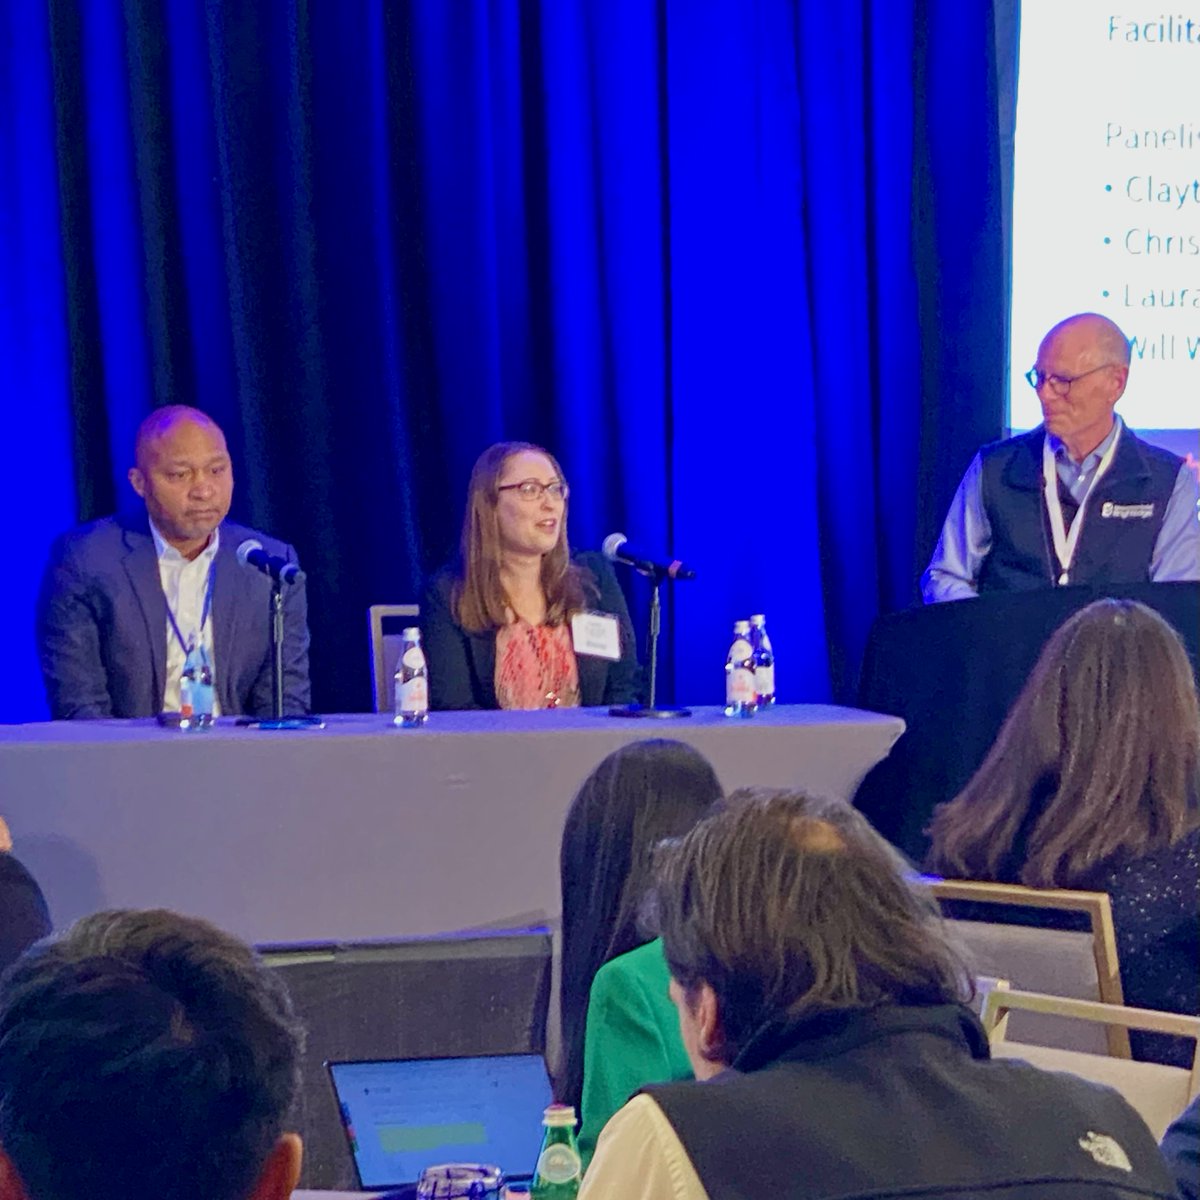 I enjoyed speaking at the #ACSBrightEdgeSummit on a panel moderated by @billdahutmd from @AmericanCancer. Too many patients struggle to access #cancer treatments. @Reboot_Rx is working to mitigate #financialtoxicity and #healthinequities through generic #drugrepurposing.